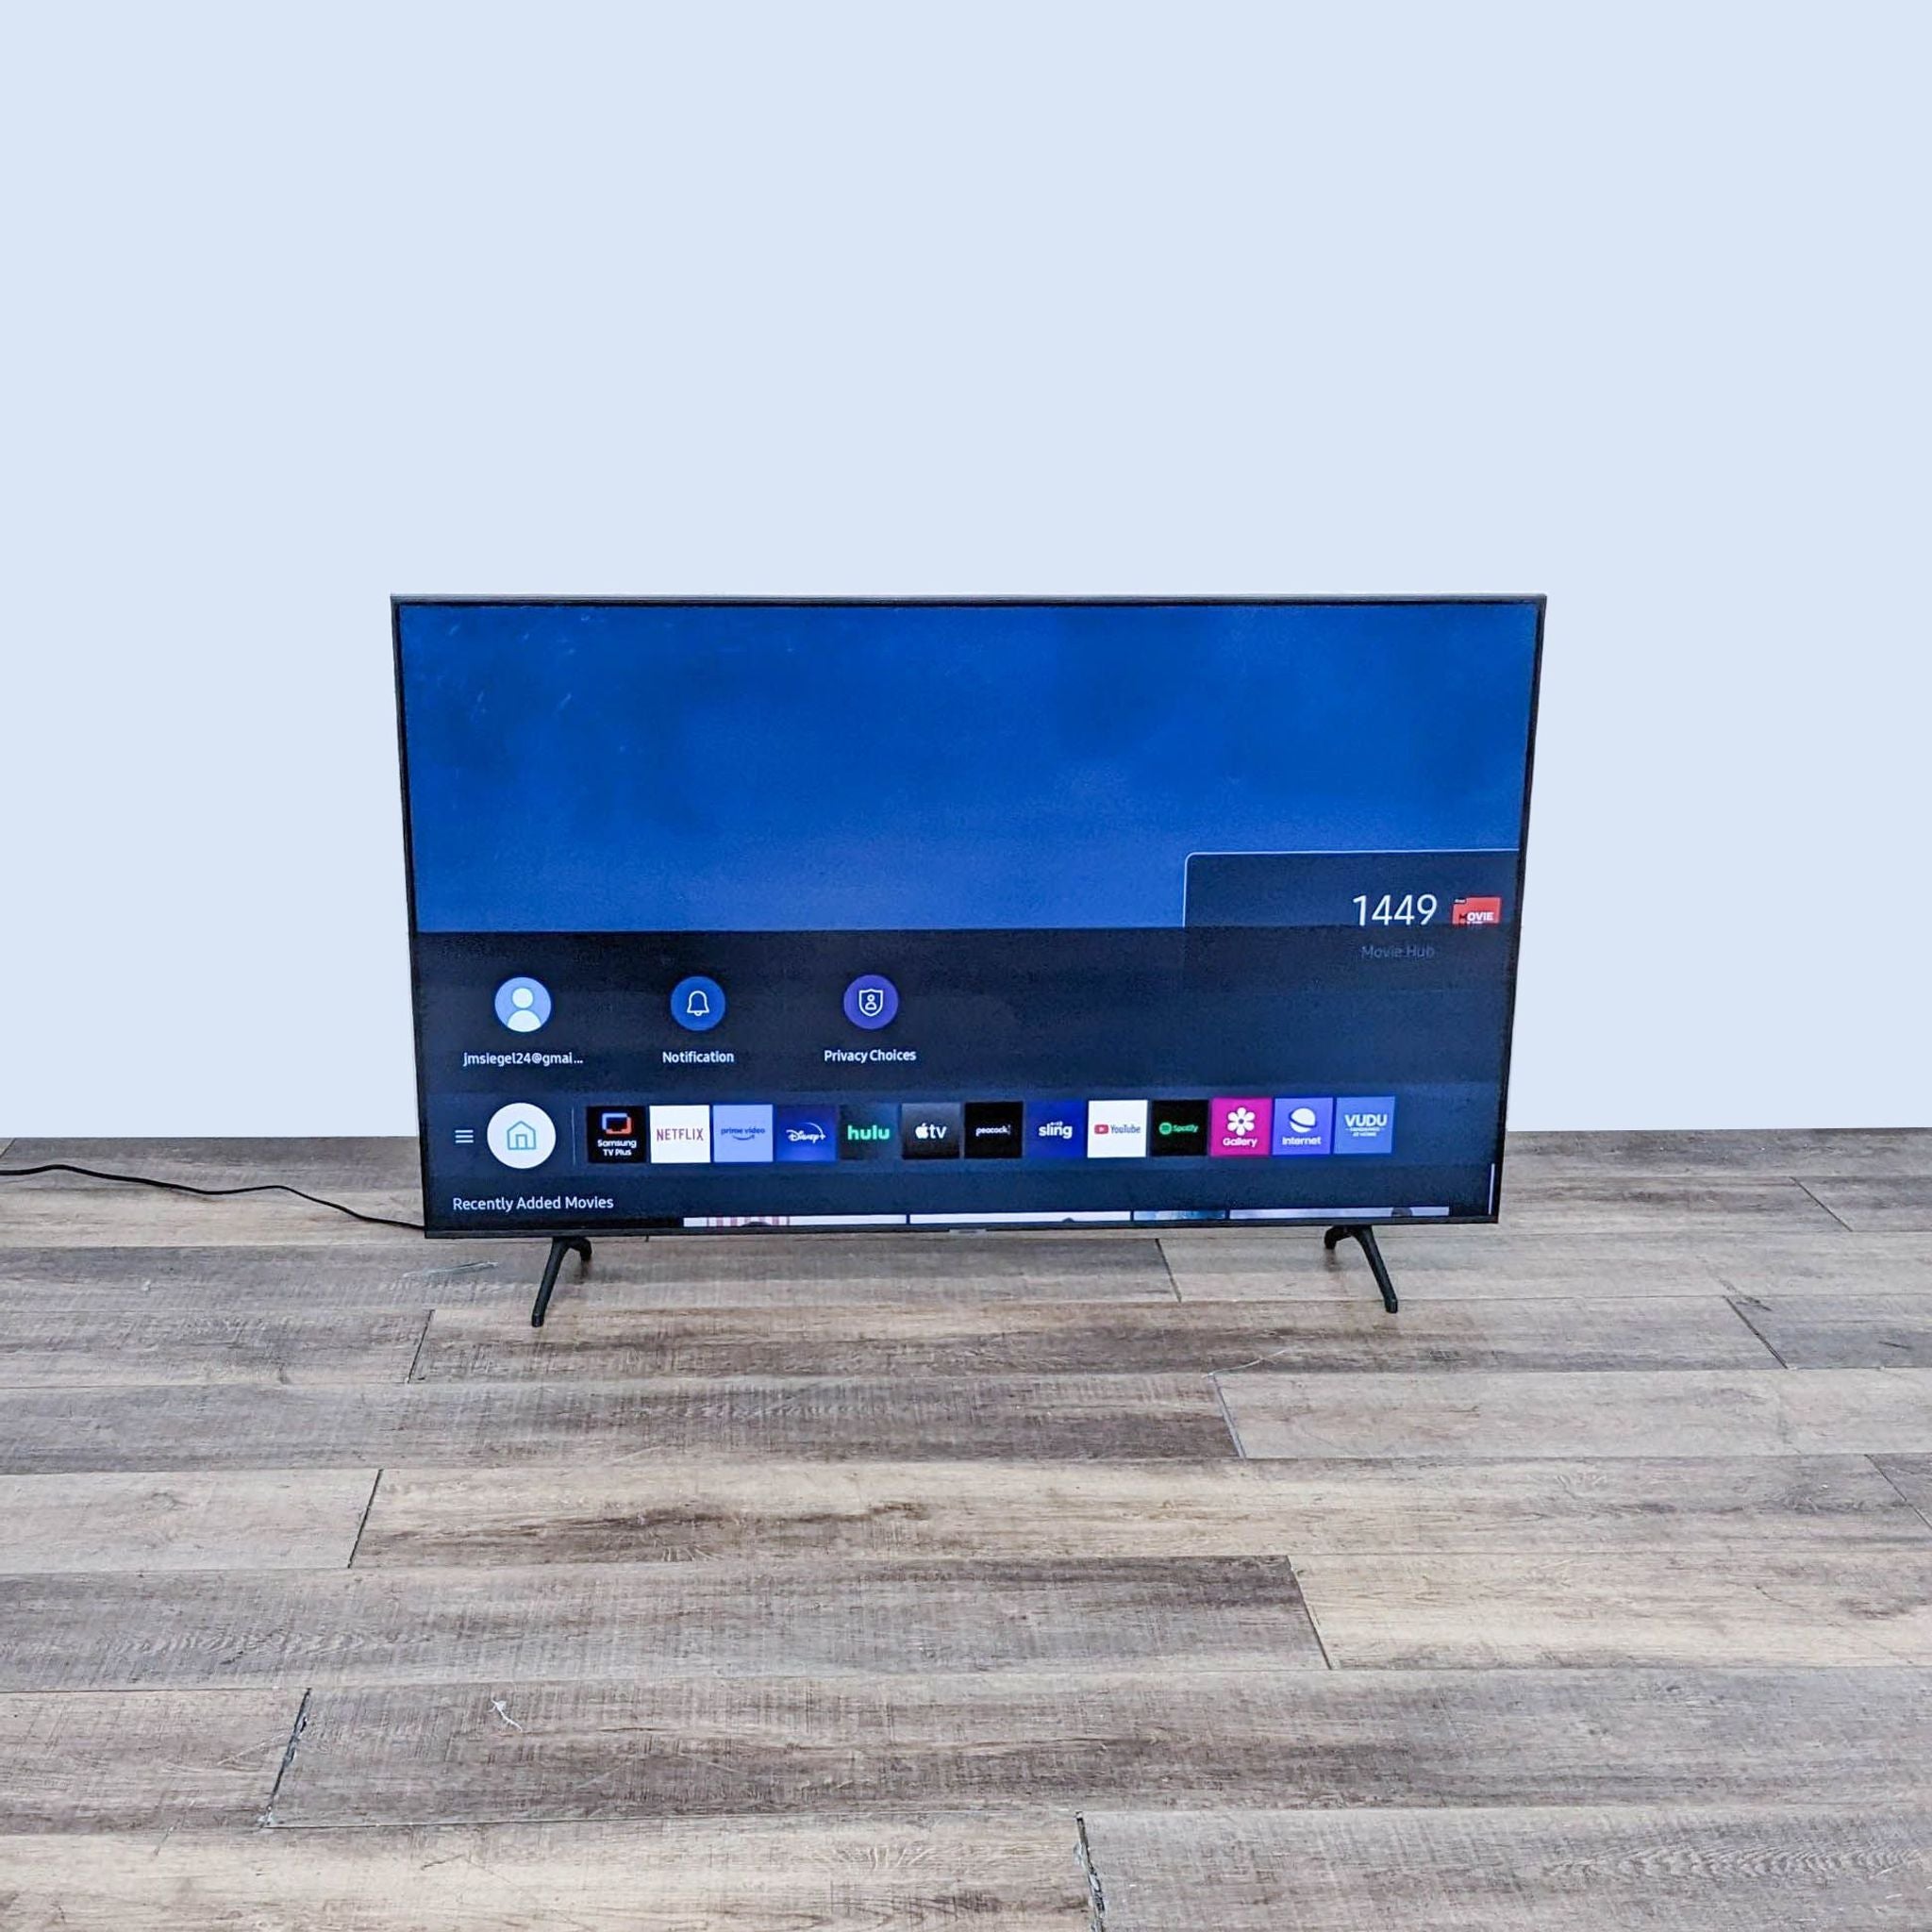 Samsung high-definition TV displaying a menu screen with app icons, set on a wood-textured surface.